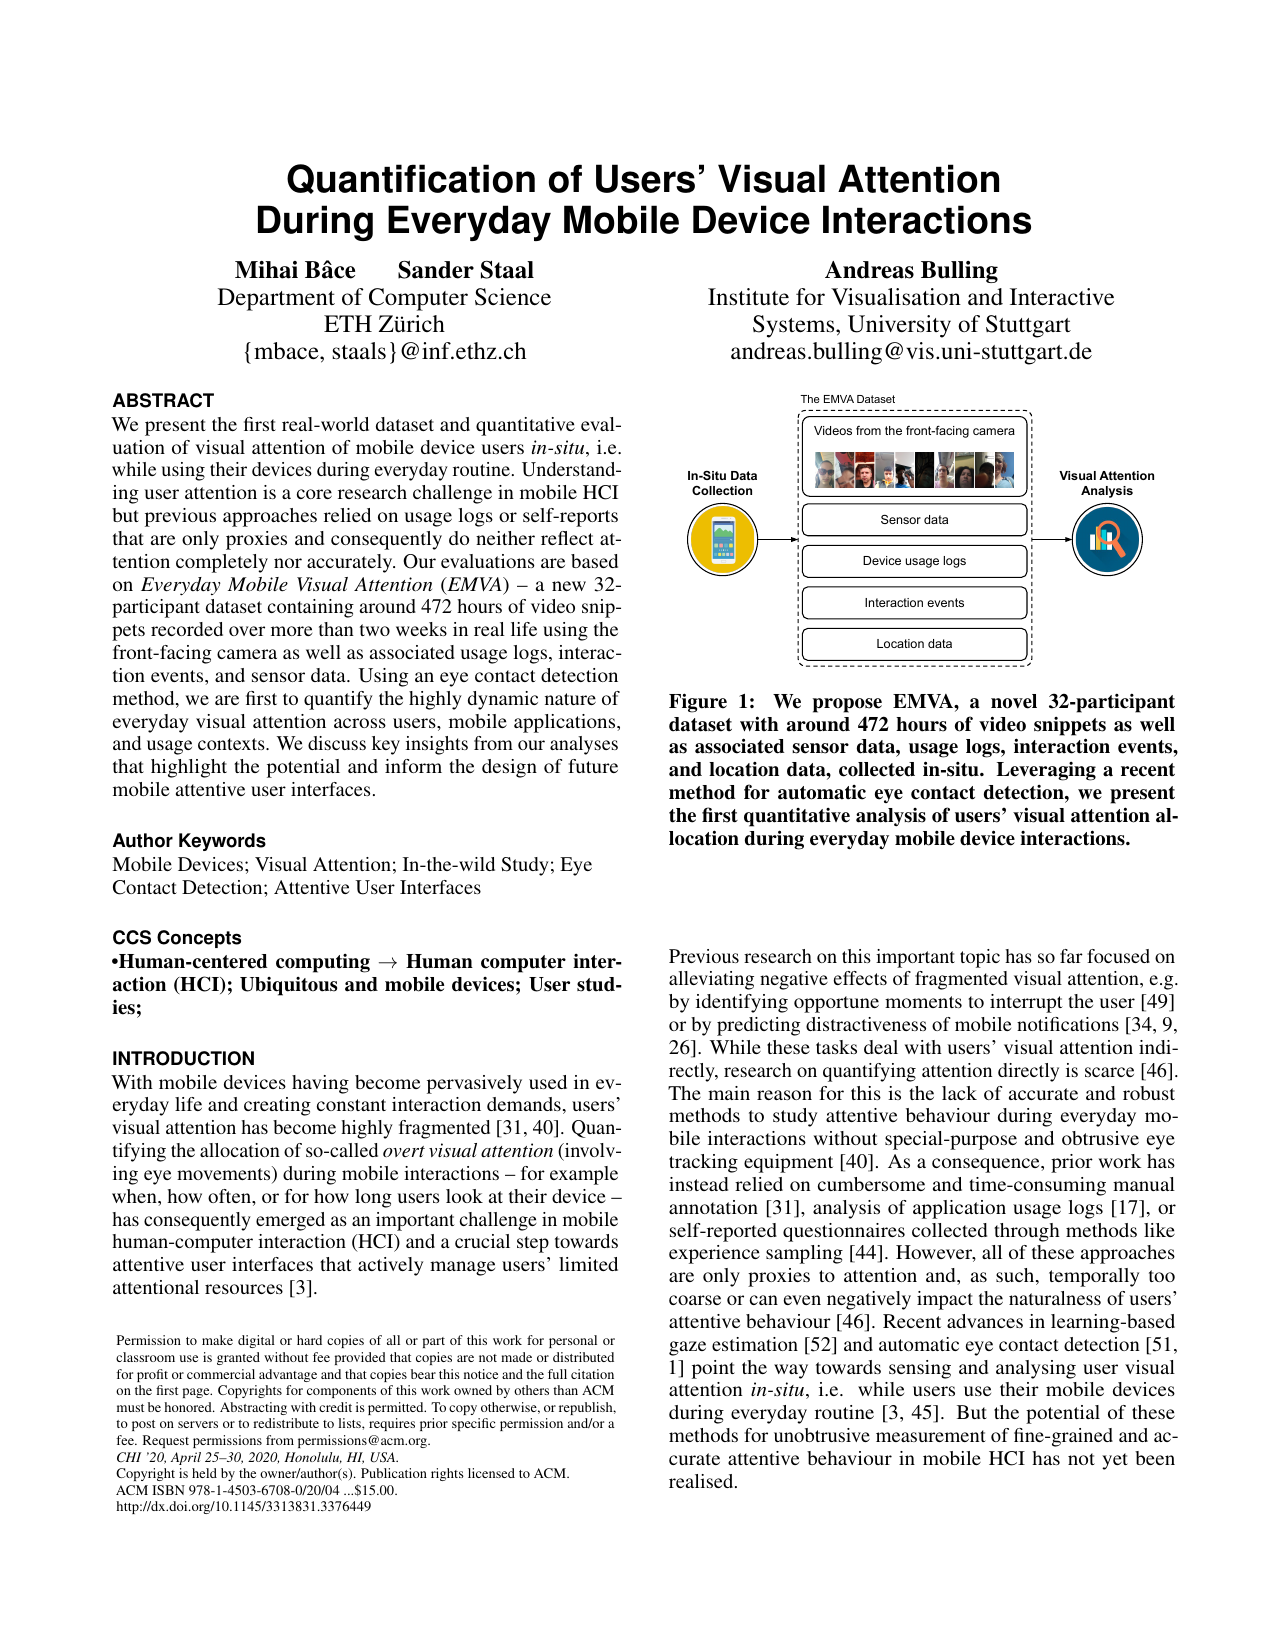 Quantification of Users’ Visual Attention During Everyday Mobile Device Interactions